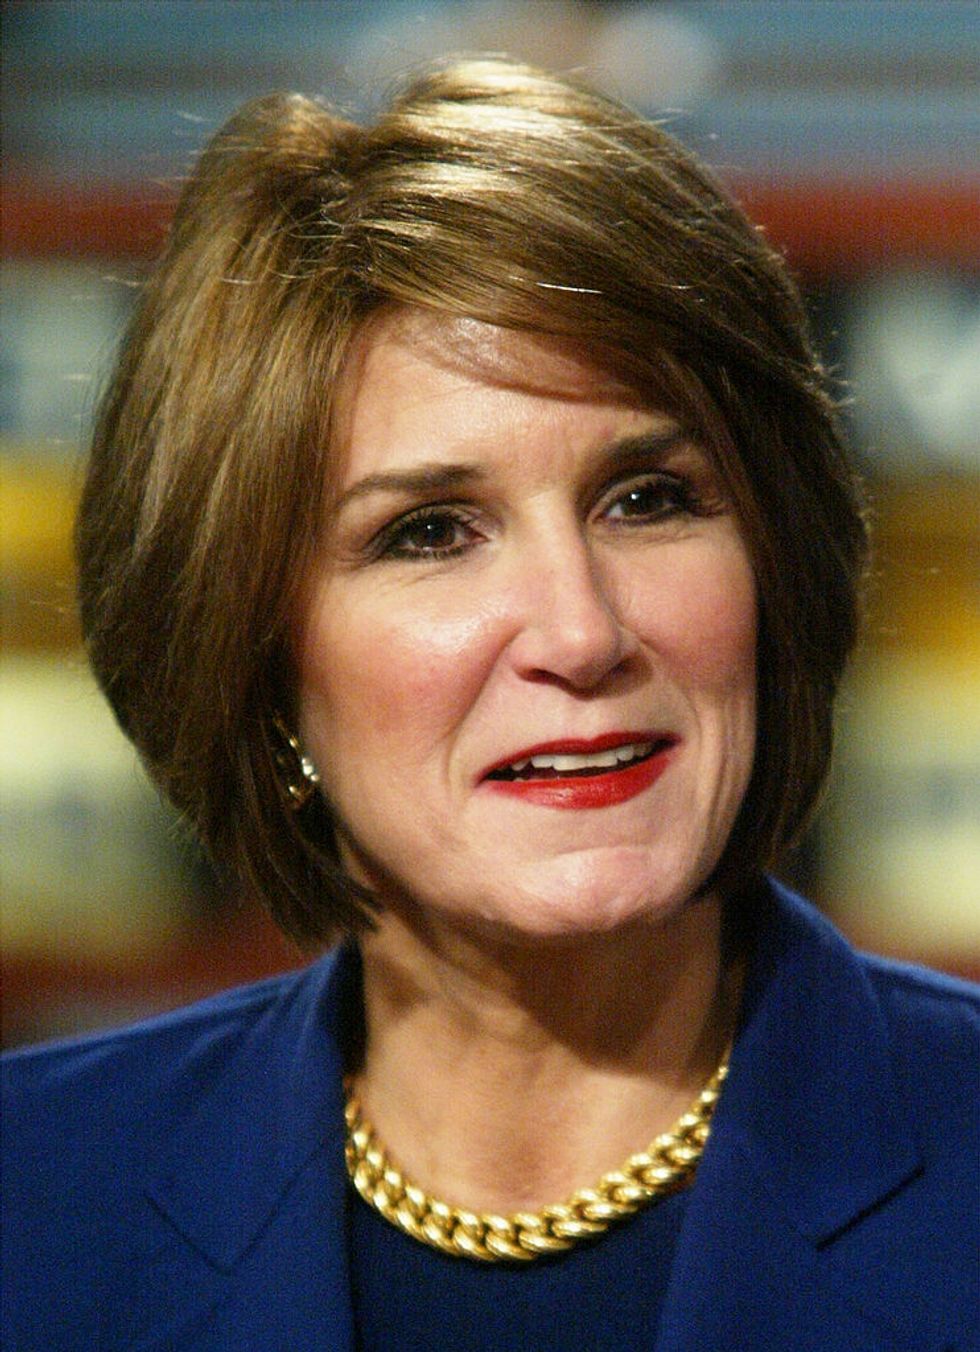 GOP Icon Mary Matalin Explains Why She’s Leaving the Republican Party to Become a Libertarian